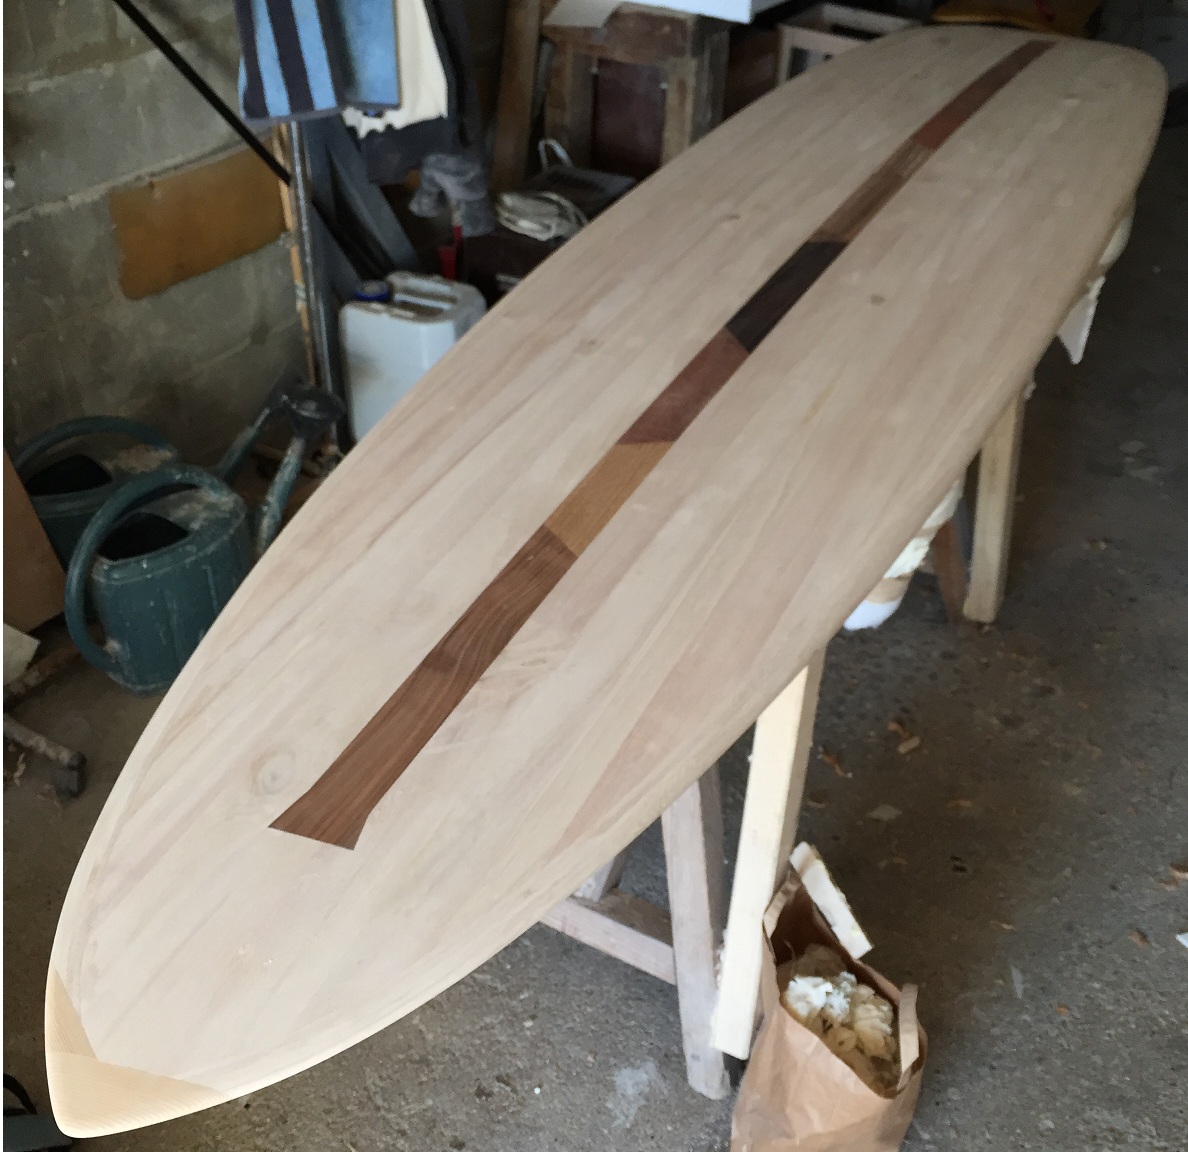 Wooden Surfboards: JB from France experiments with wooden boards